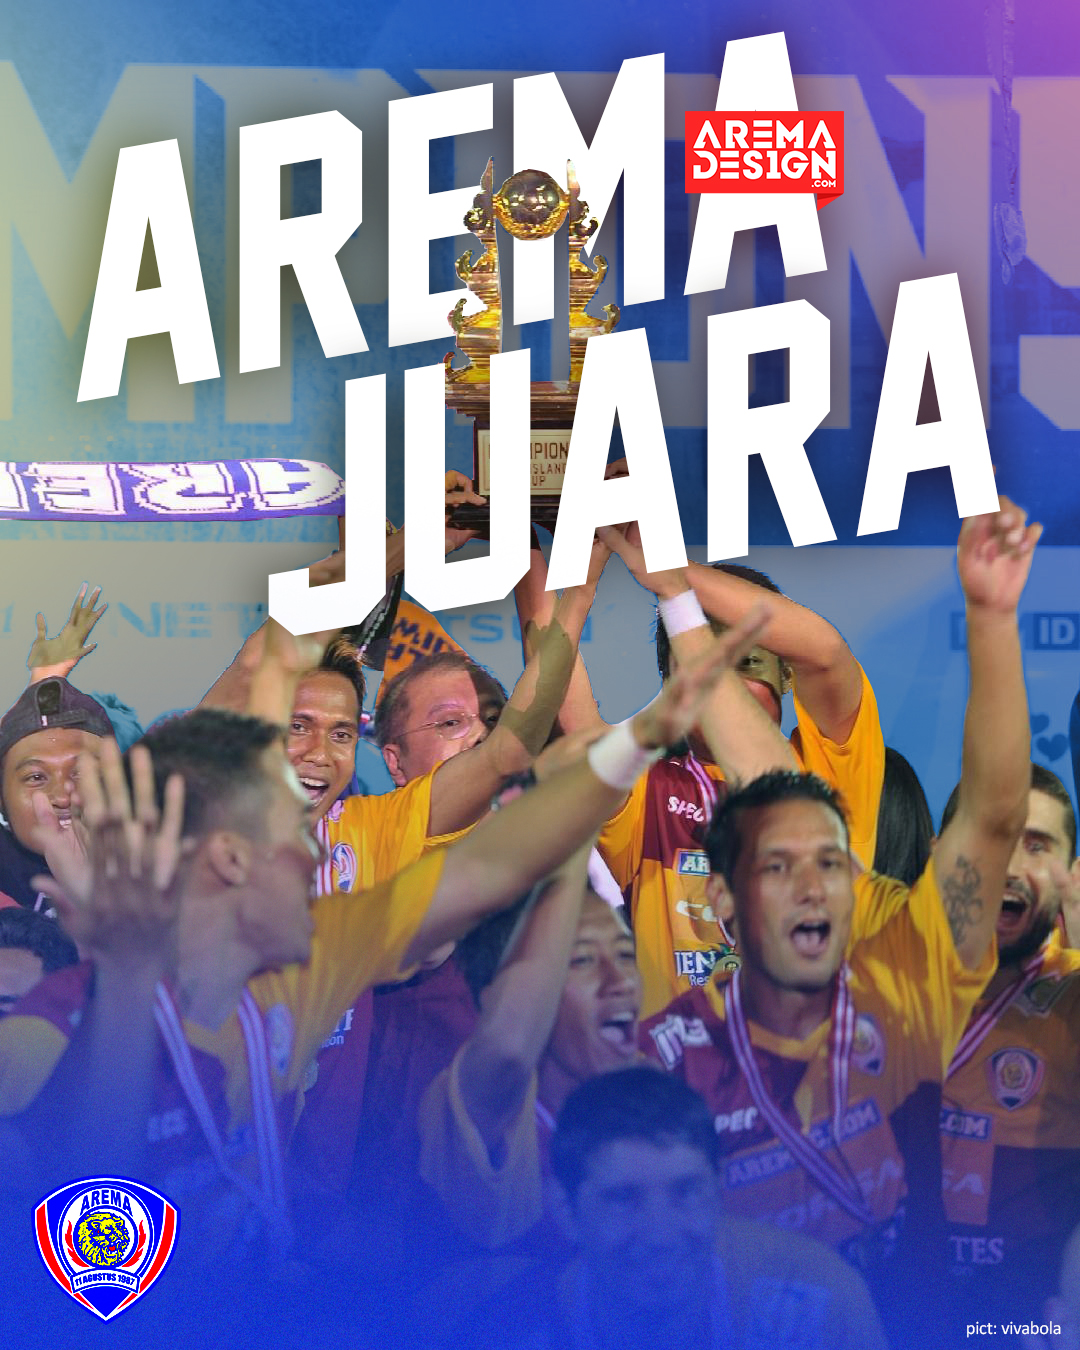 download wallpaper arema,product,youth,fan,games,cheering